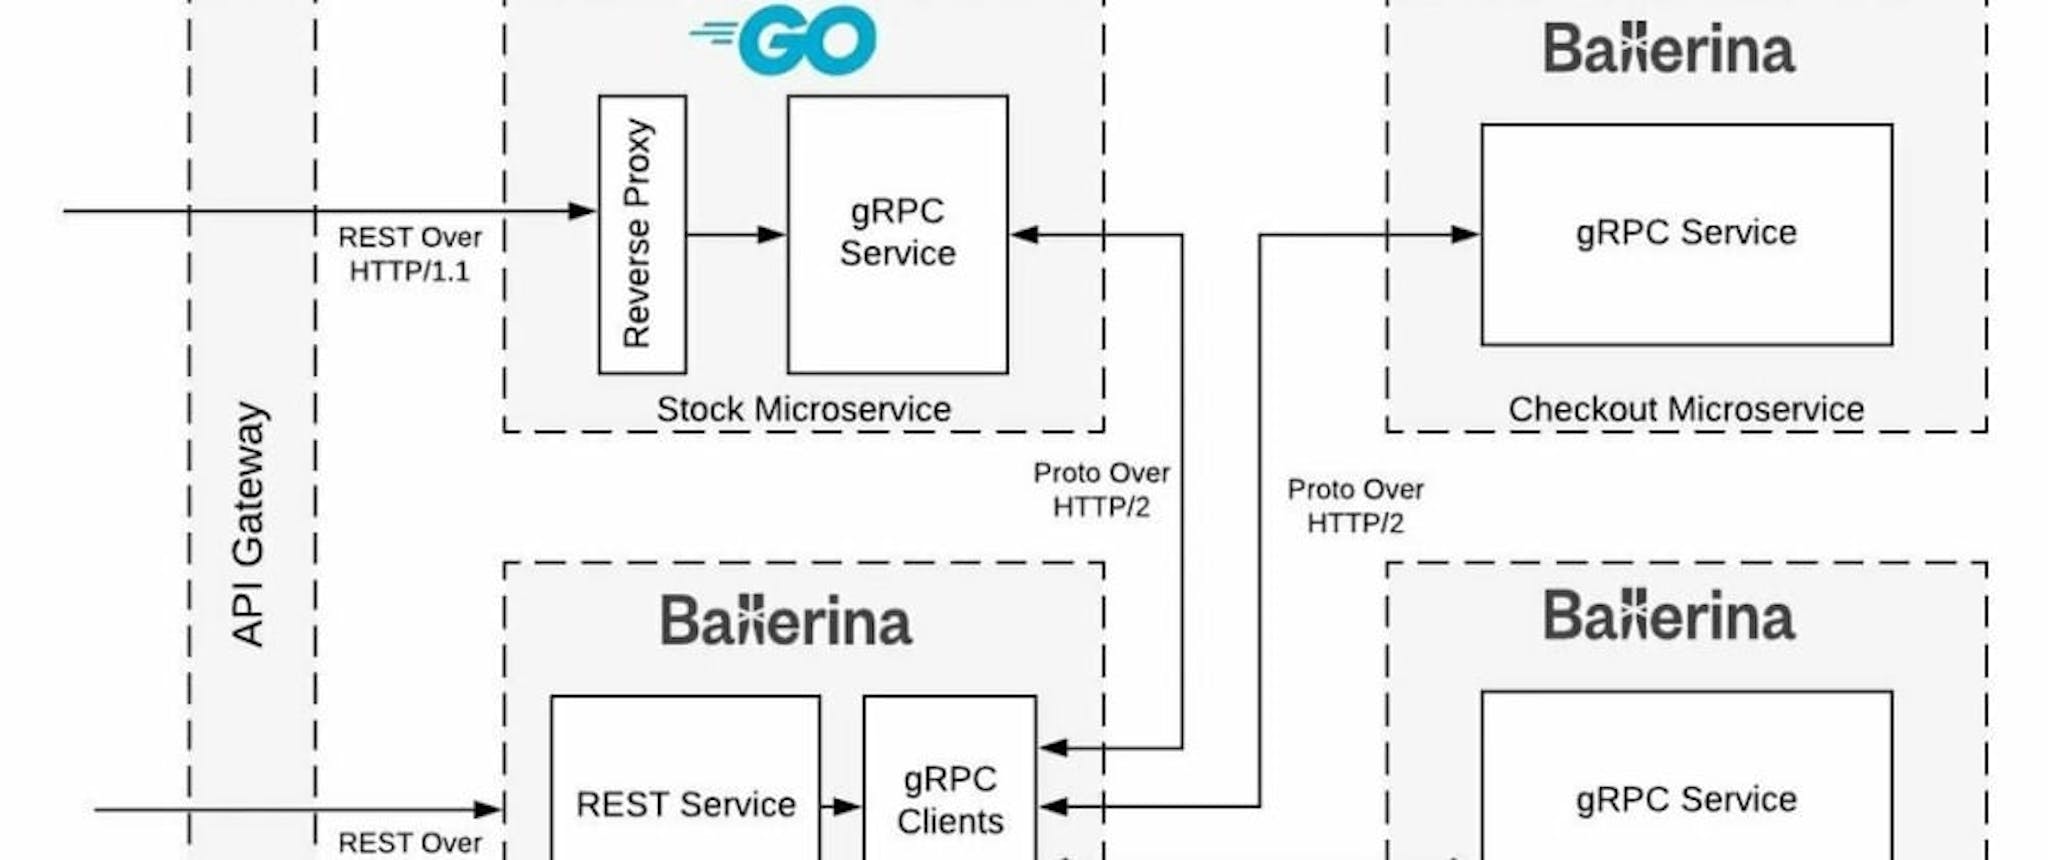 featured image - Creating Production Grade Microservices with Go and gRPC